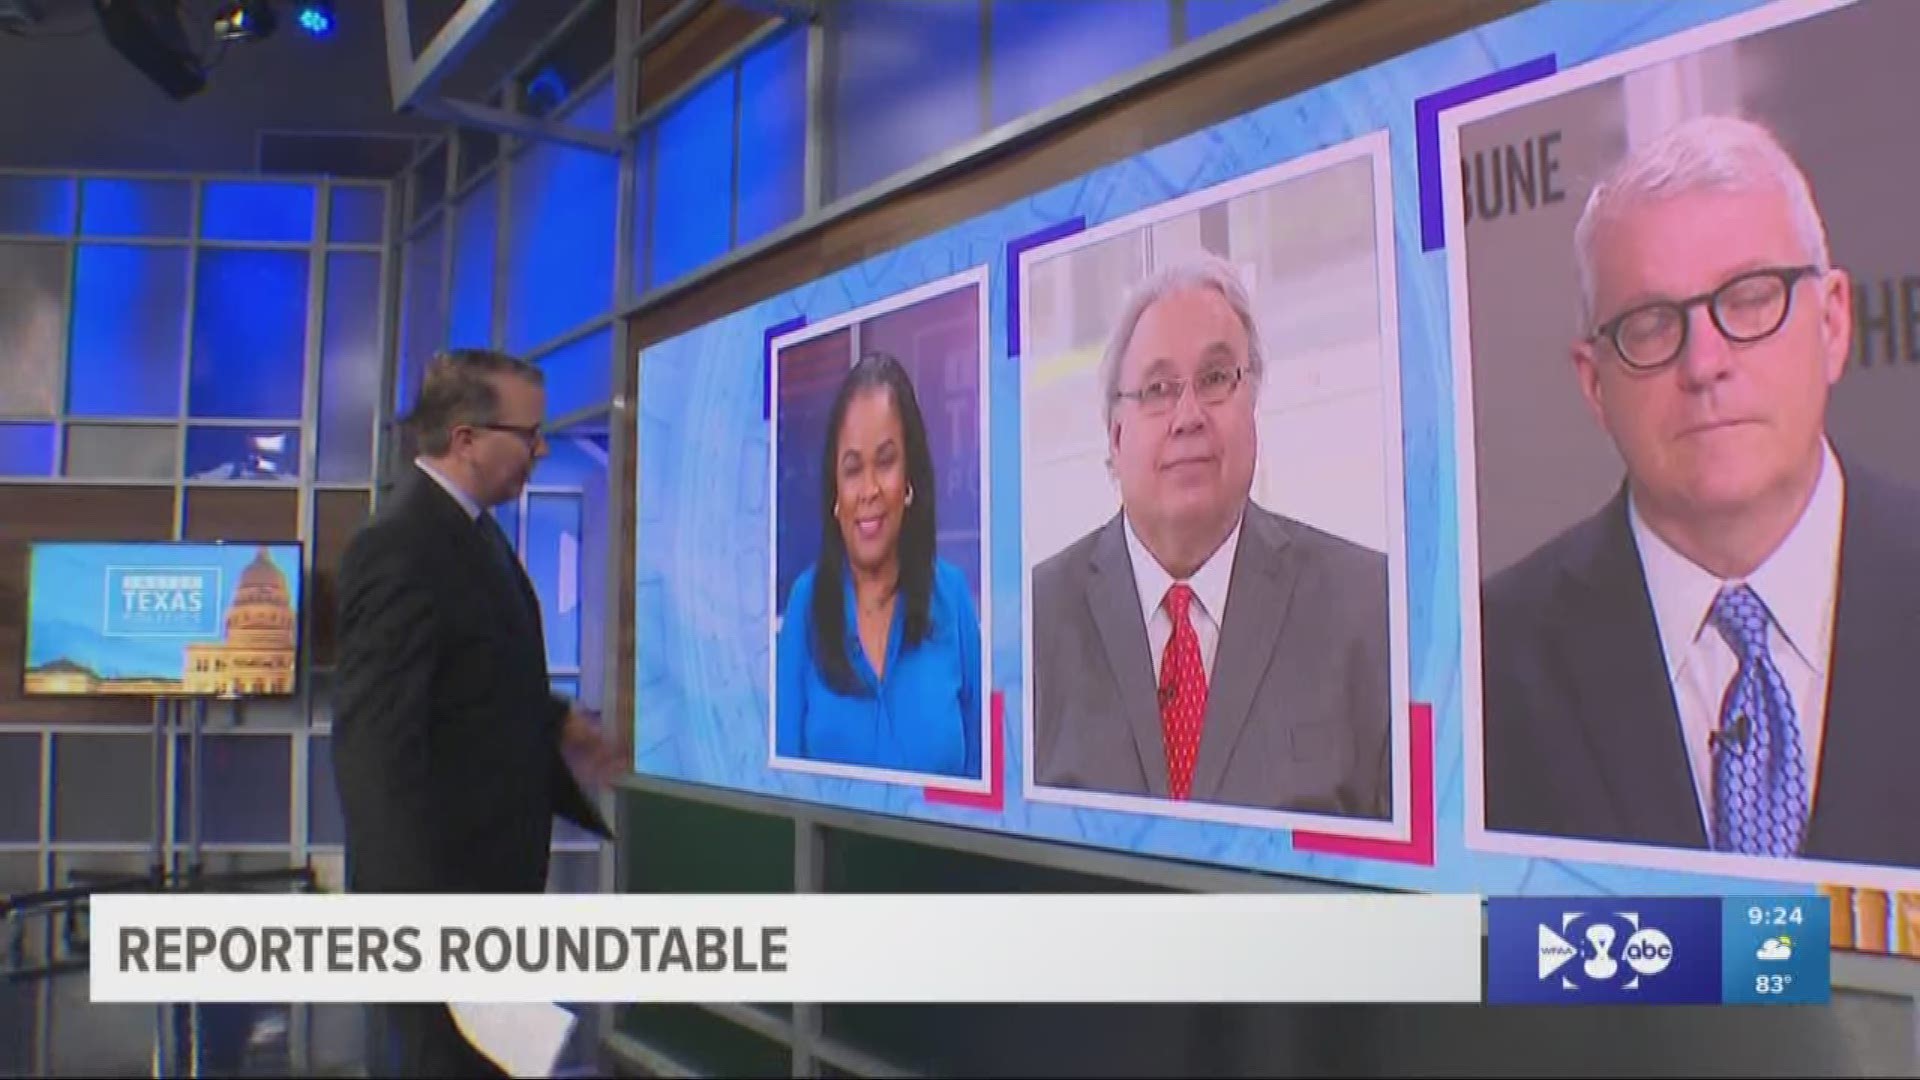 This Reporters Roundtable discusses whether former U.S. Representative Beto O'Rourke’s new strategy to win the Democratic nomination for president will be successful. The four journalists also offered perspective on the Texas Education Agency’s new rankings for North Texas school districts.